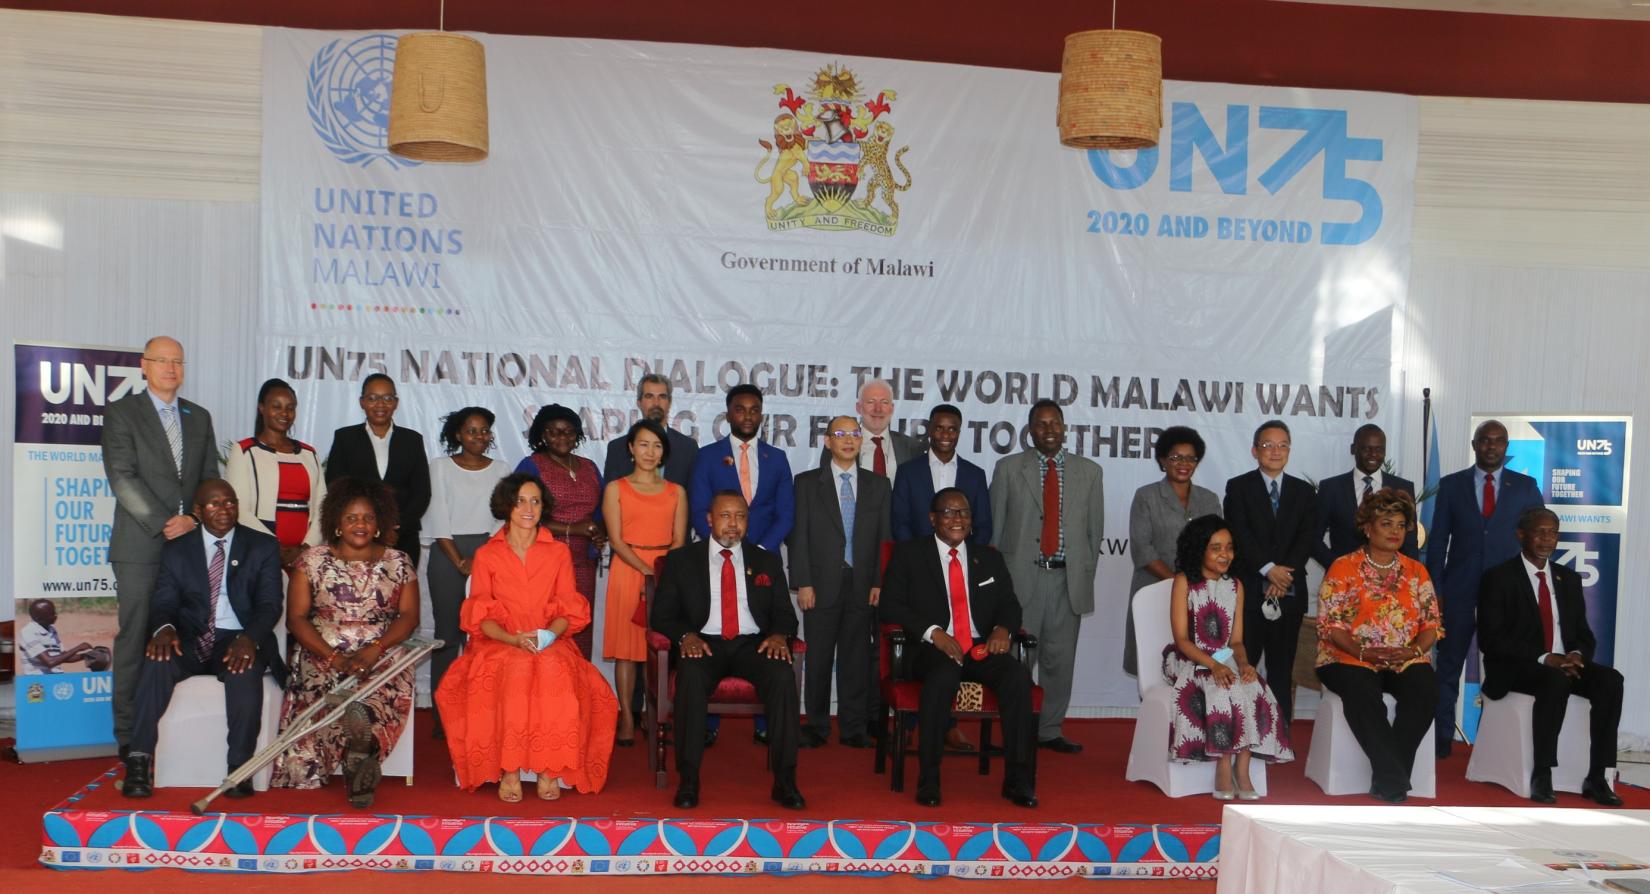 Group Photo: President Chakwera, Vice President Saulos Klaus Chilima, dialogue panelists and UN Country Team members